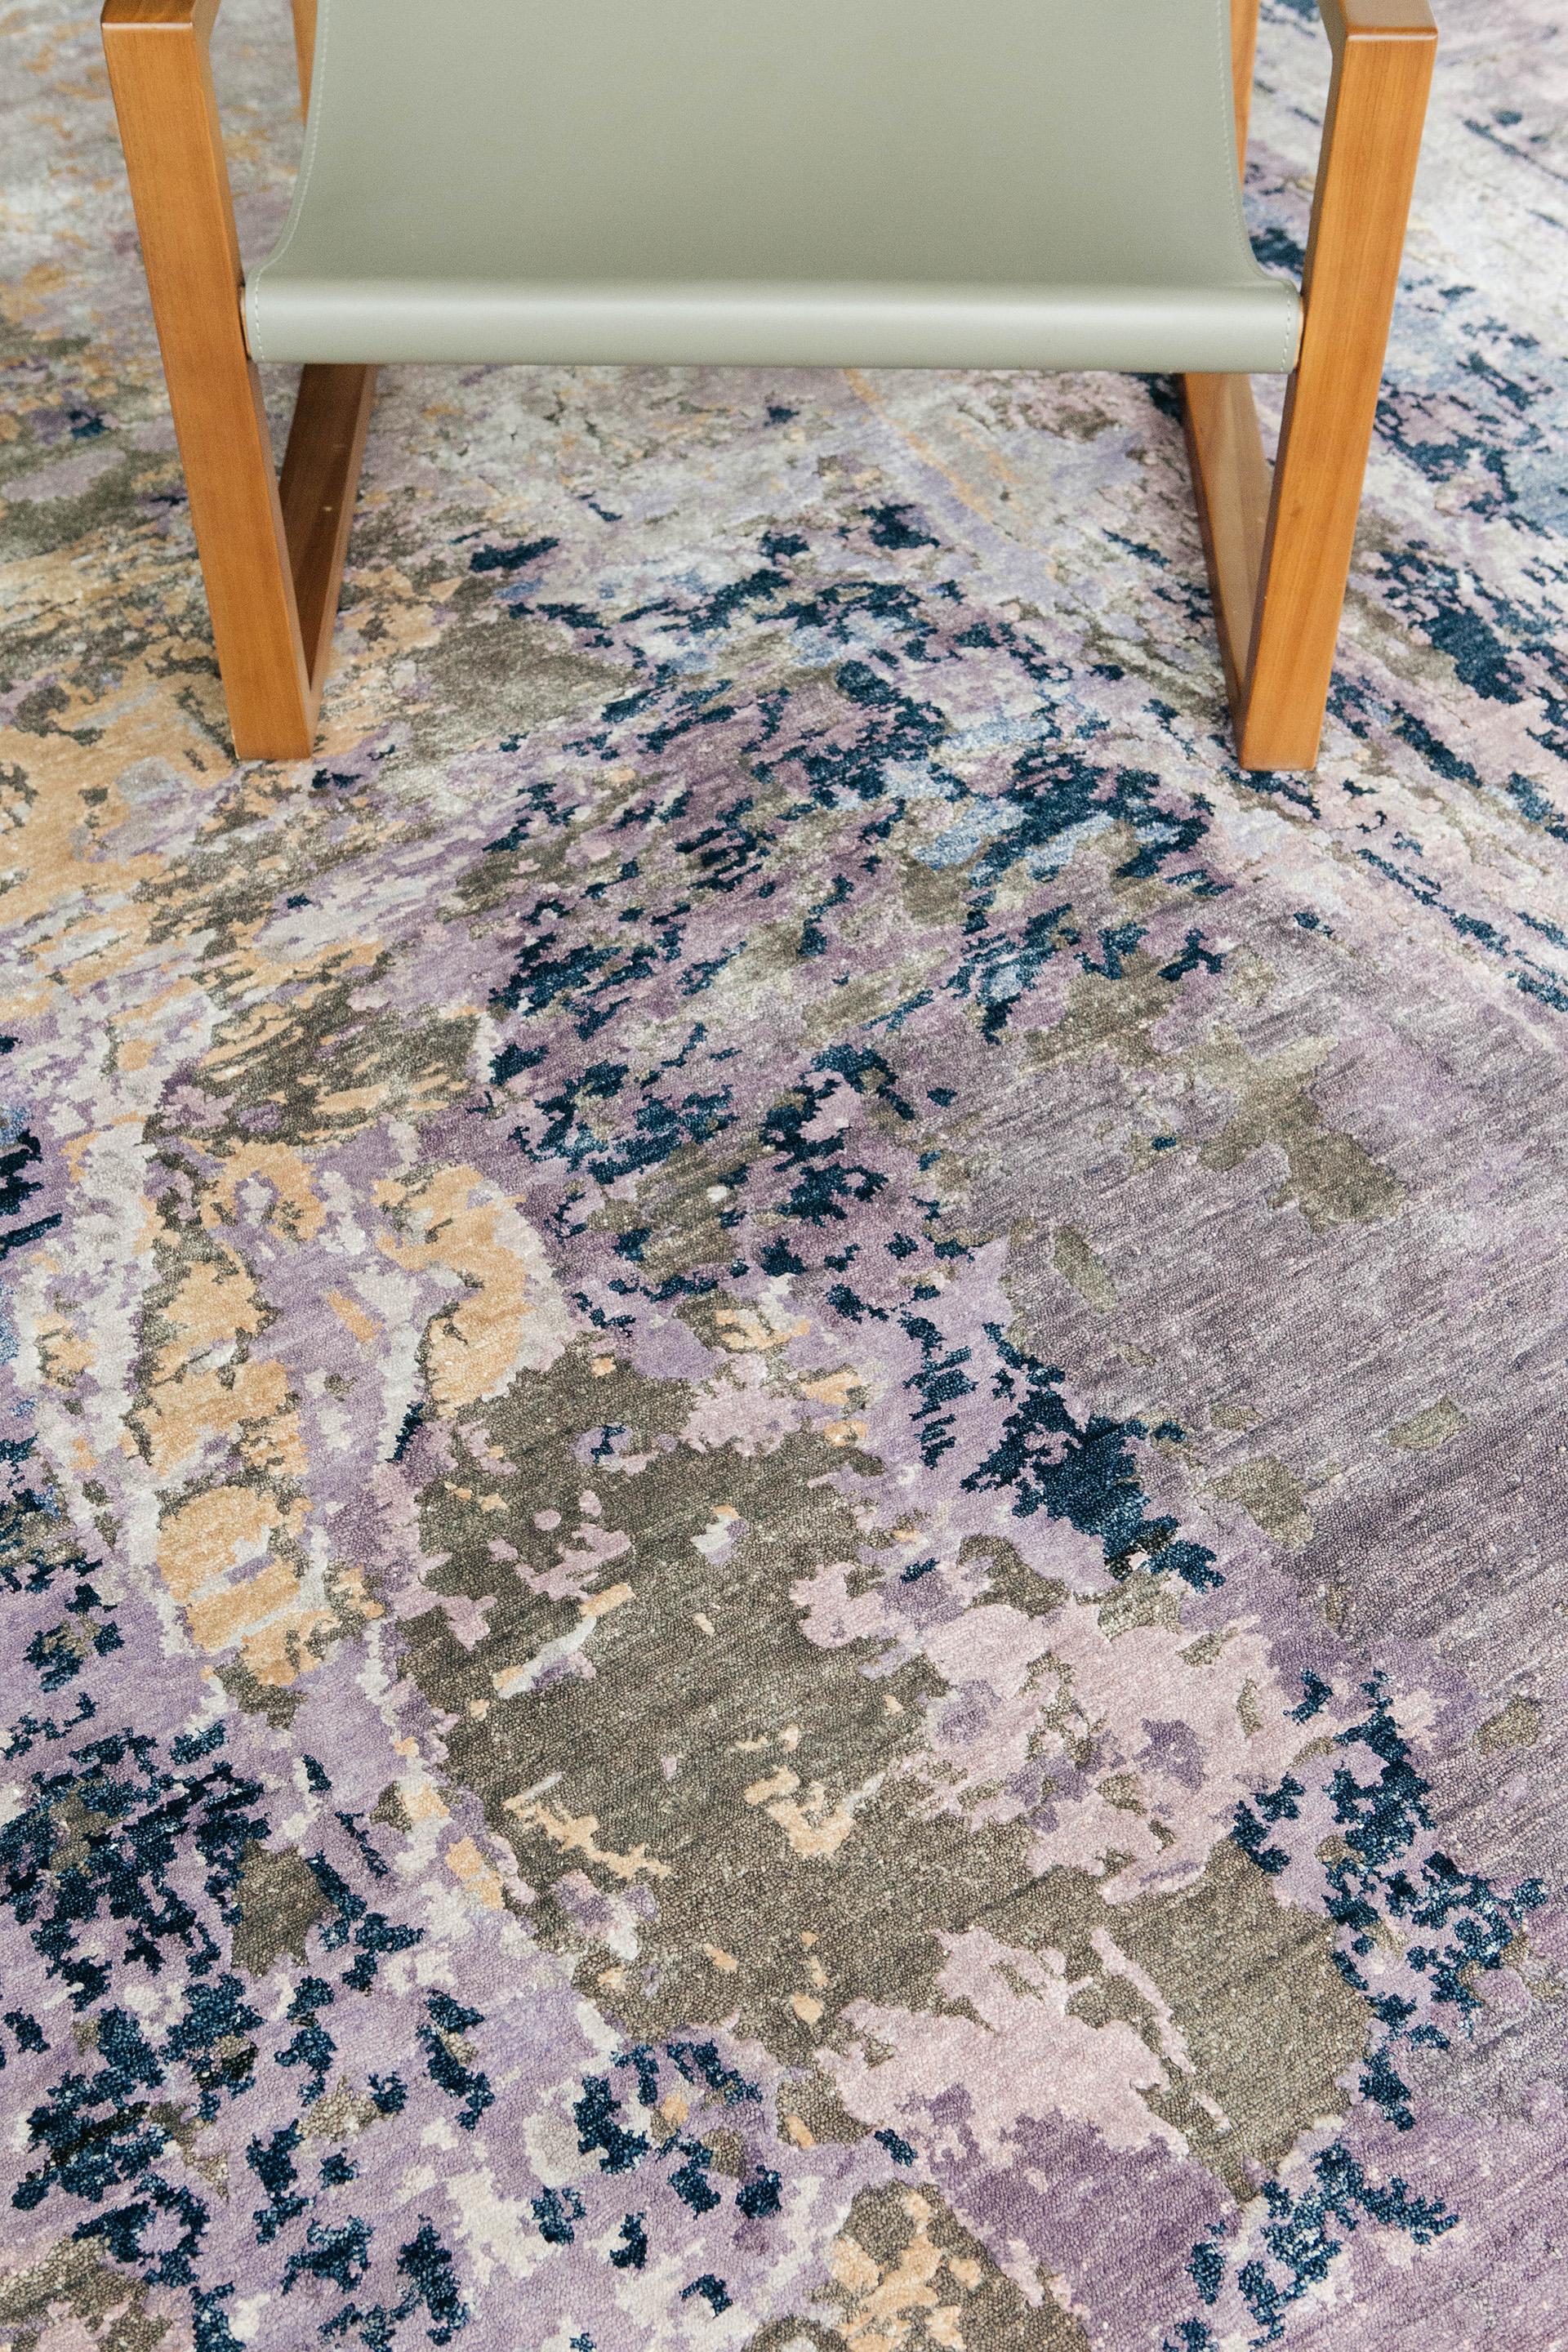 This modern design is eye-catching and luxuriously weaved with harmonious bamboo silks. Colors of pale yellow, muted moss, amethyst, and lavender are only a few of the many colors that work together to create an eye-catching design.